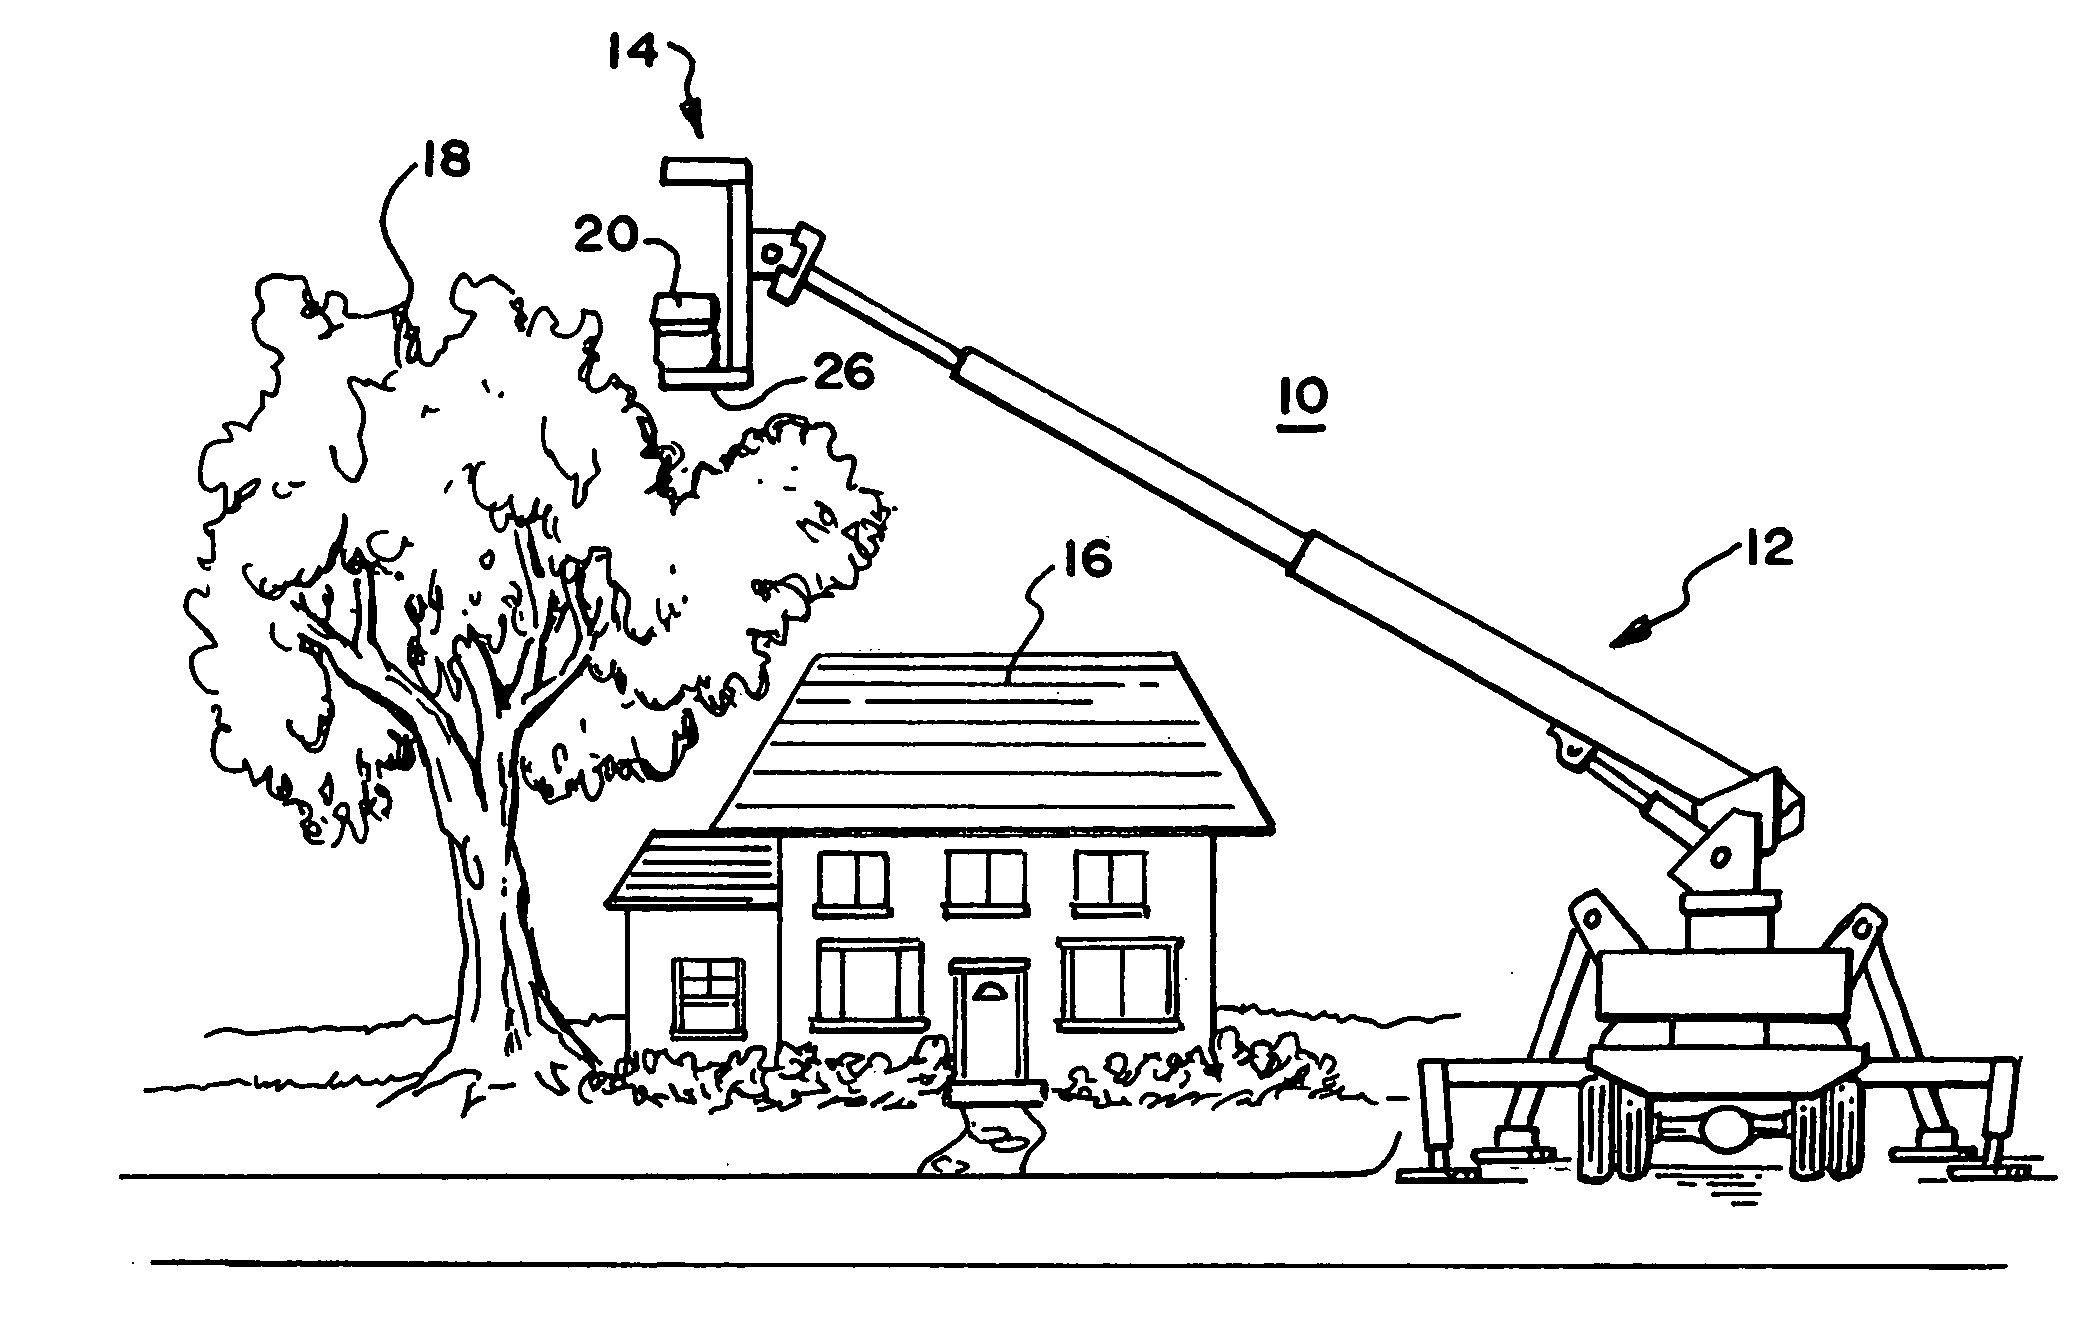 Tree and stump trimming and removal system